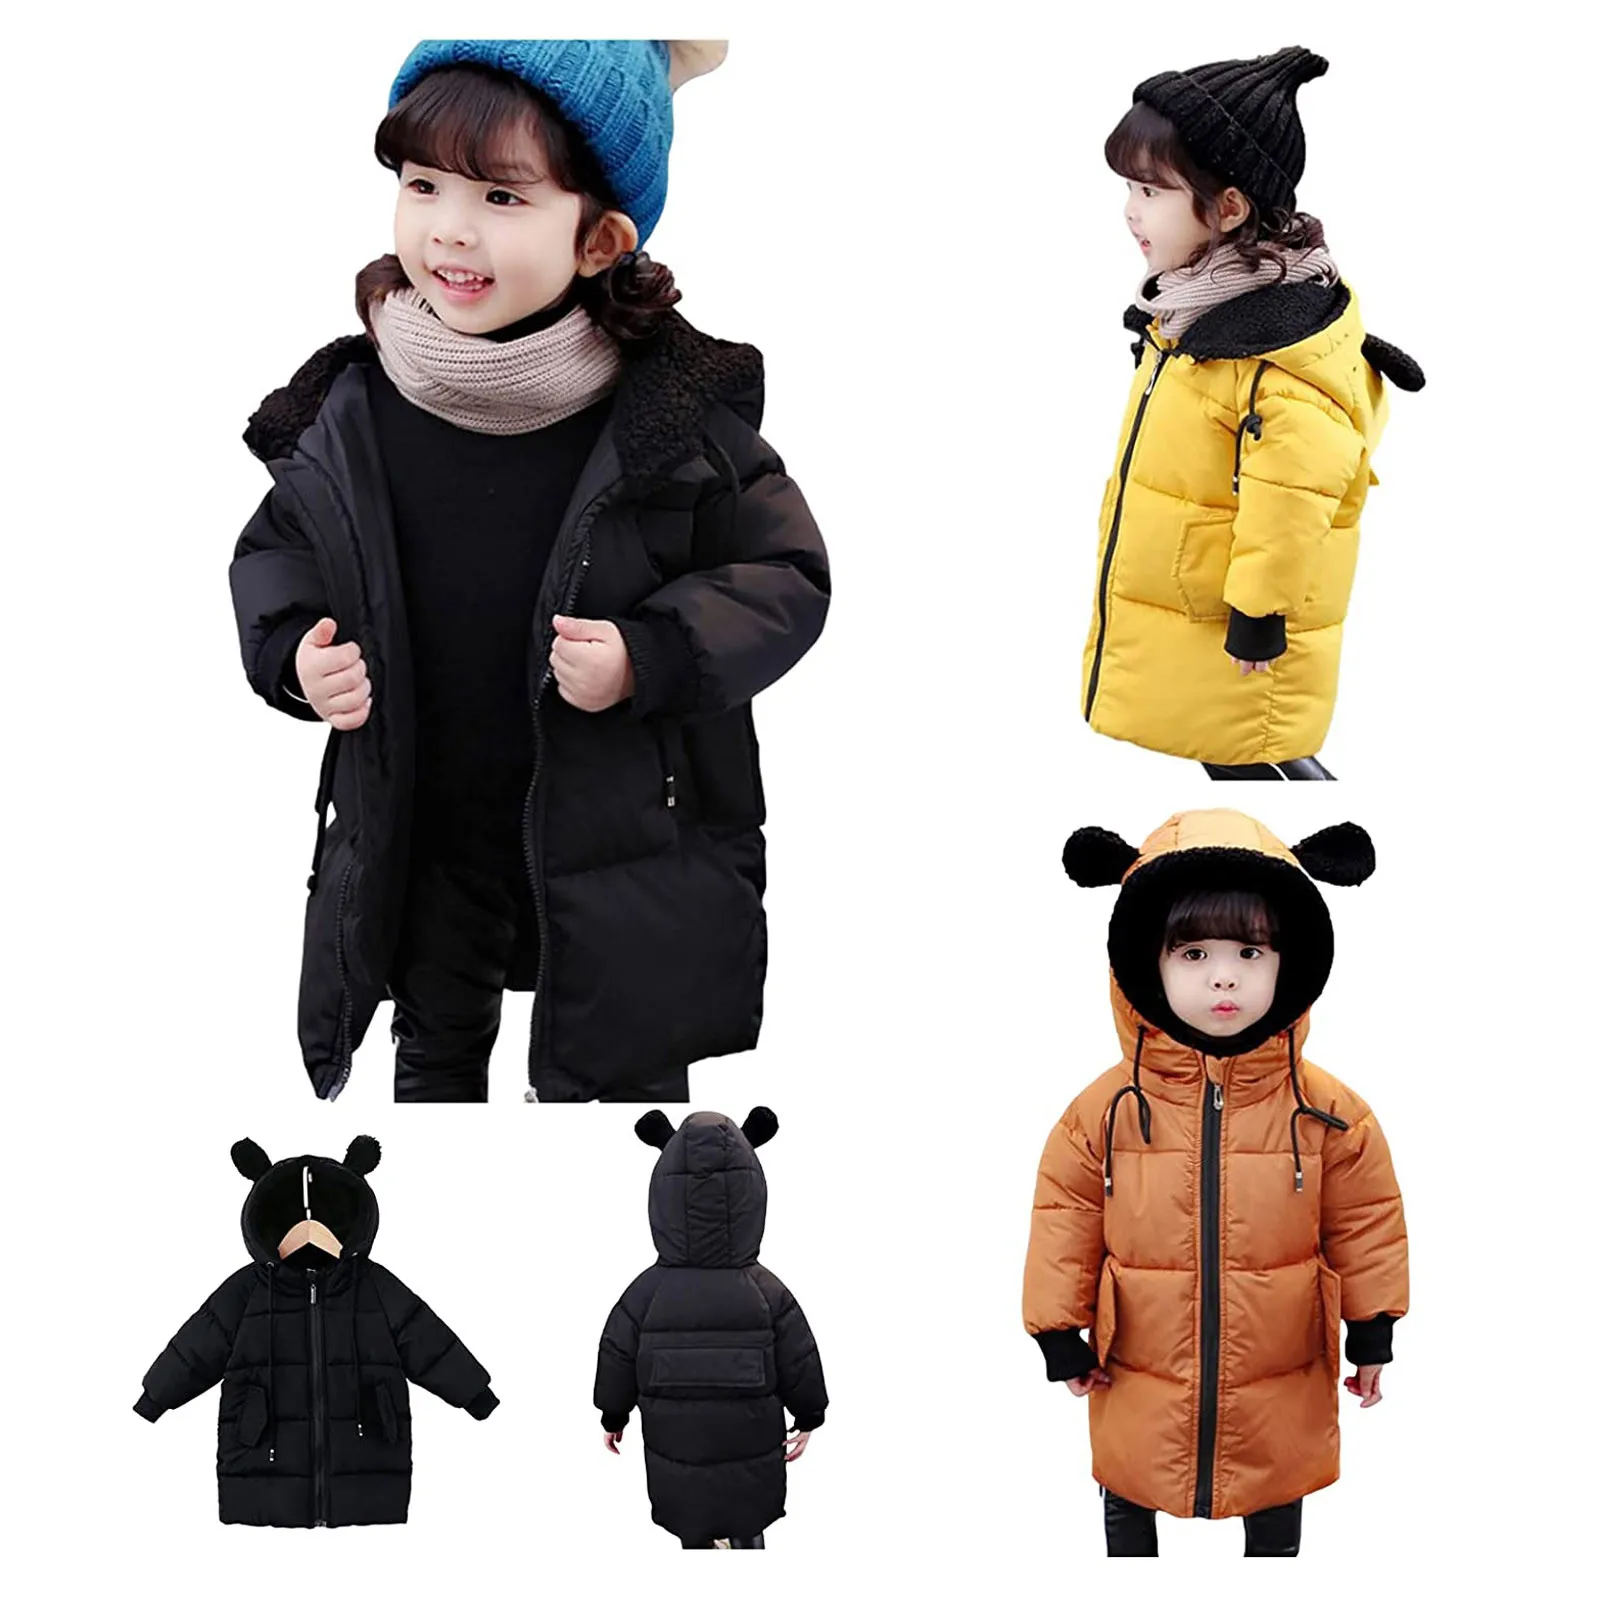 Child Kids Girl Boy Winter Hooded Coat Cloak Jacket Thick Warm Outerwear Clothes 